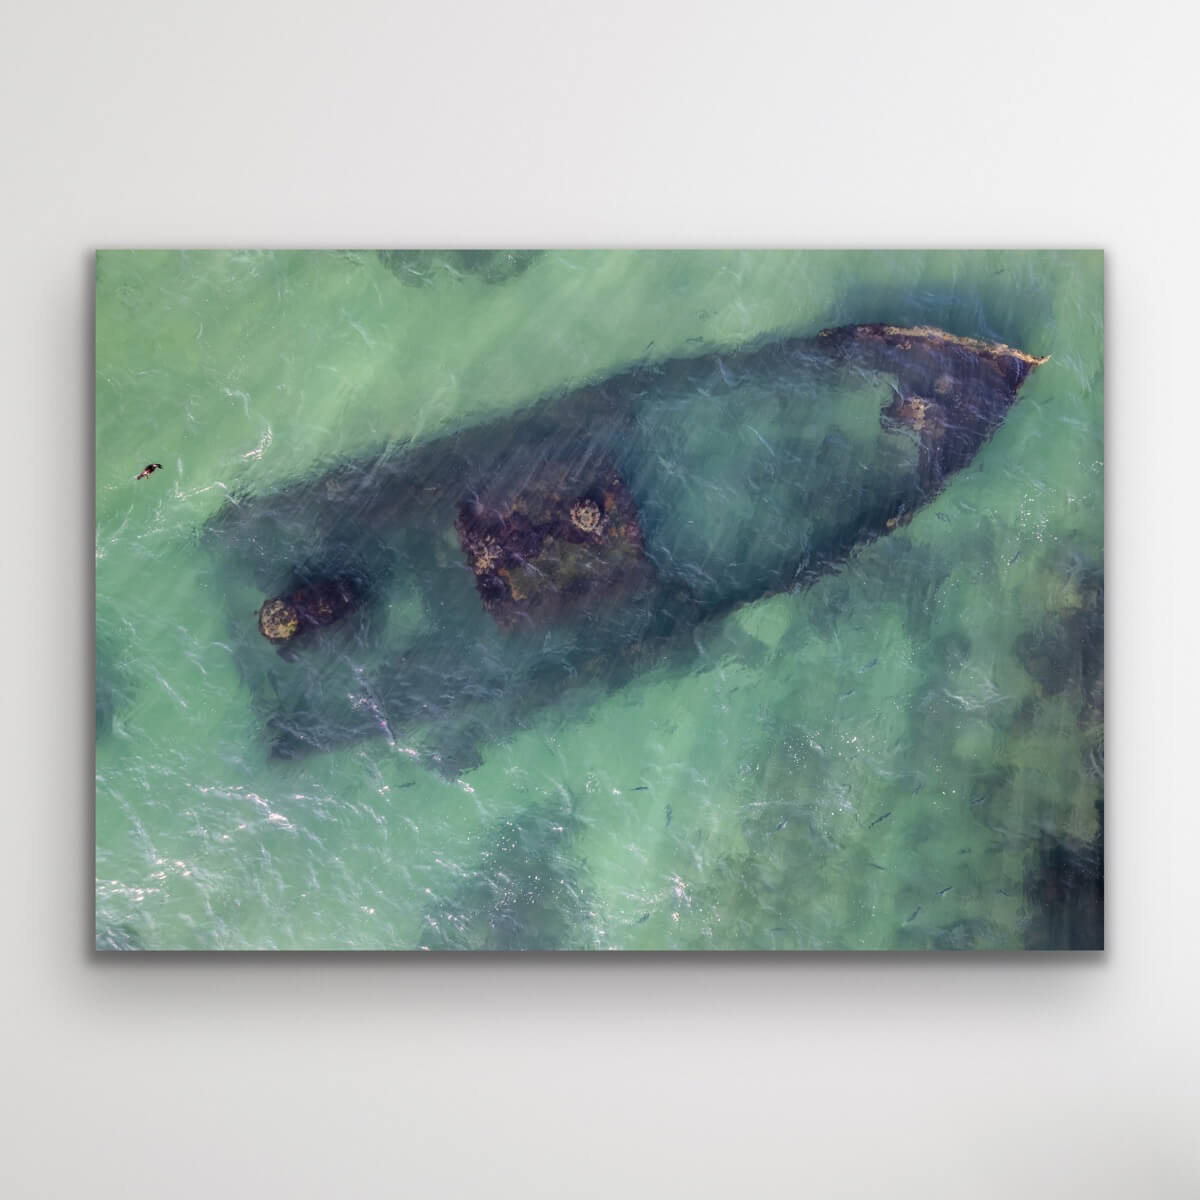 Compton Bay Aerial SS Carbon Wreck Photograph Fish Gallery Isle of Wight Landscape Prints